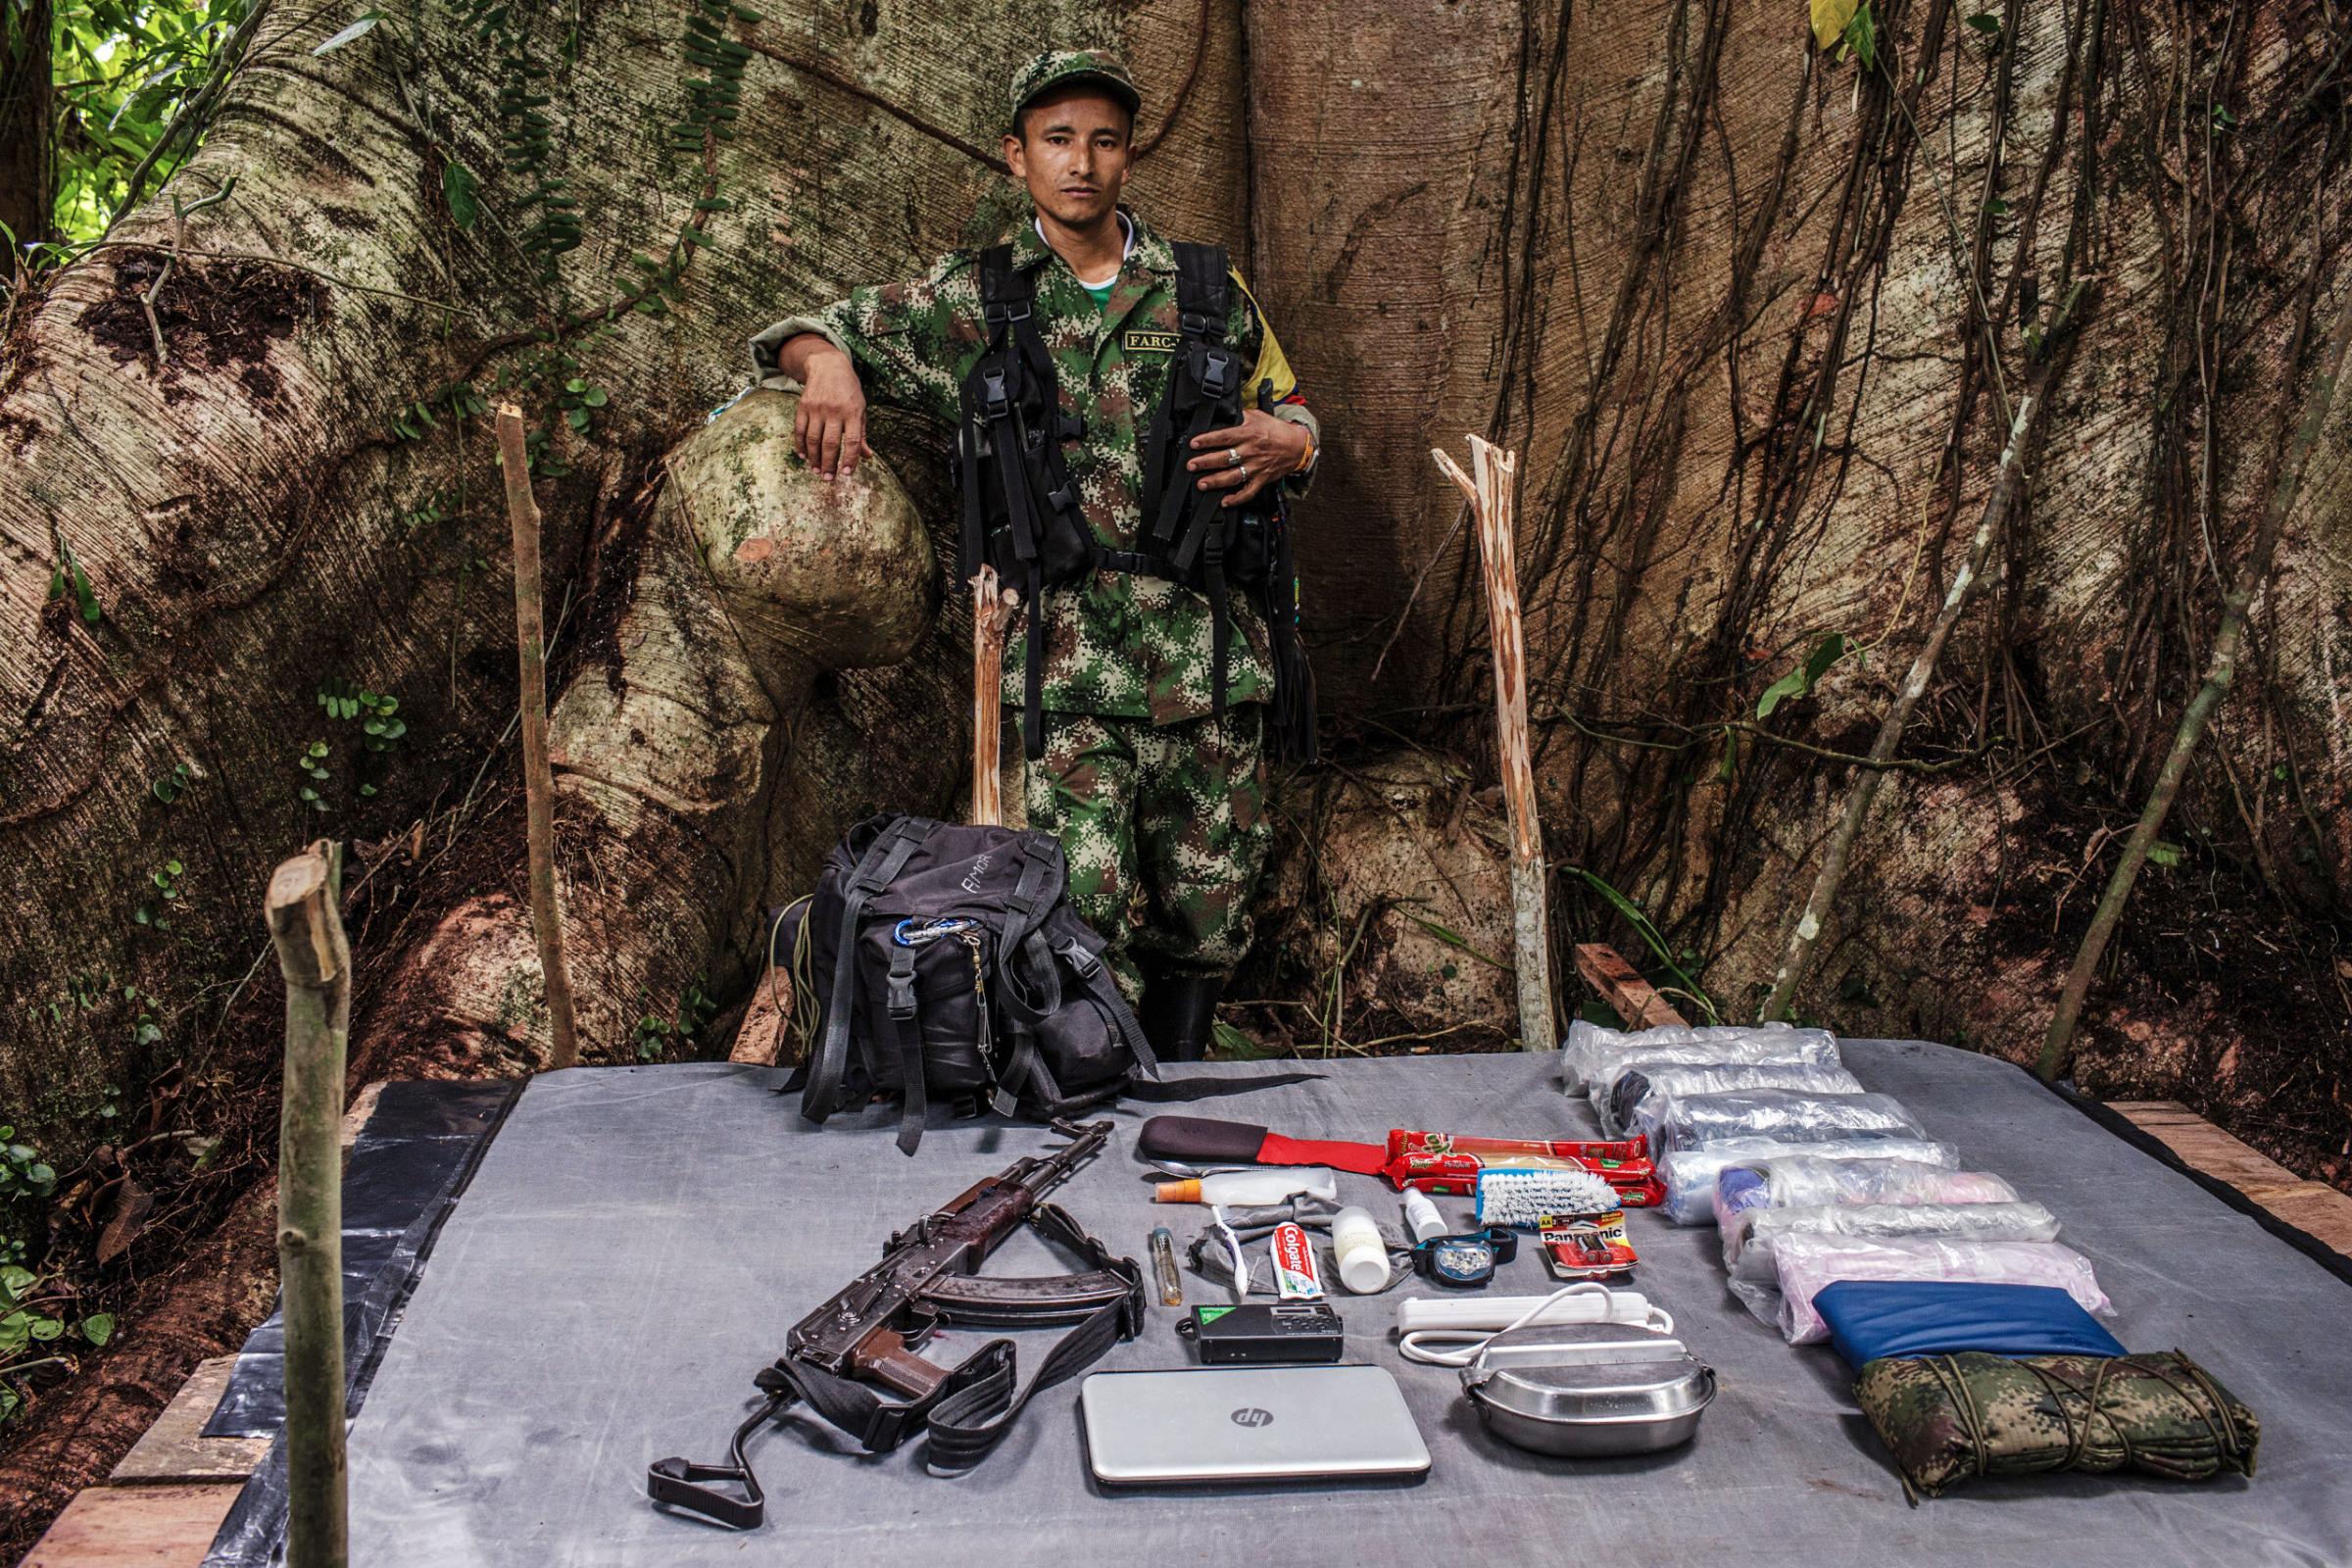 Didier, 37 years old, has been with FARC for 19 years. He carries an AK47 and a laptop for intelligence missions.